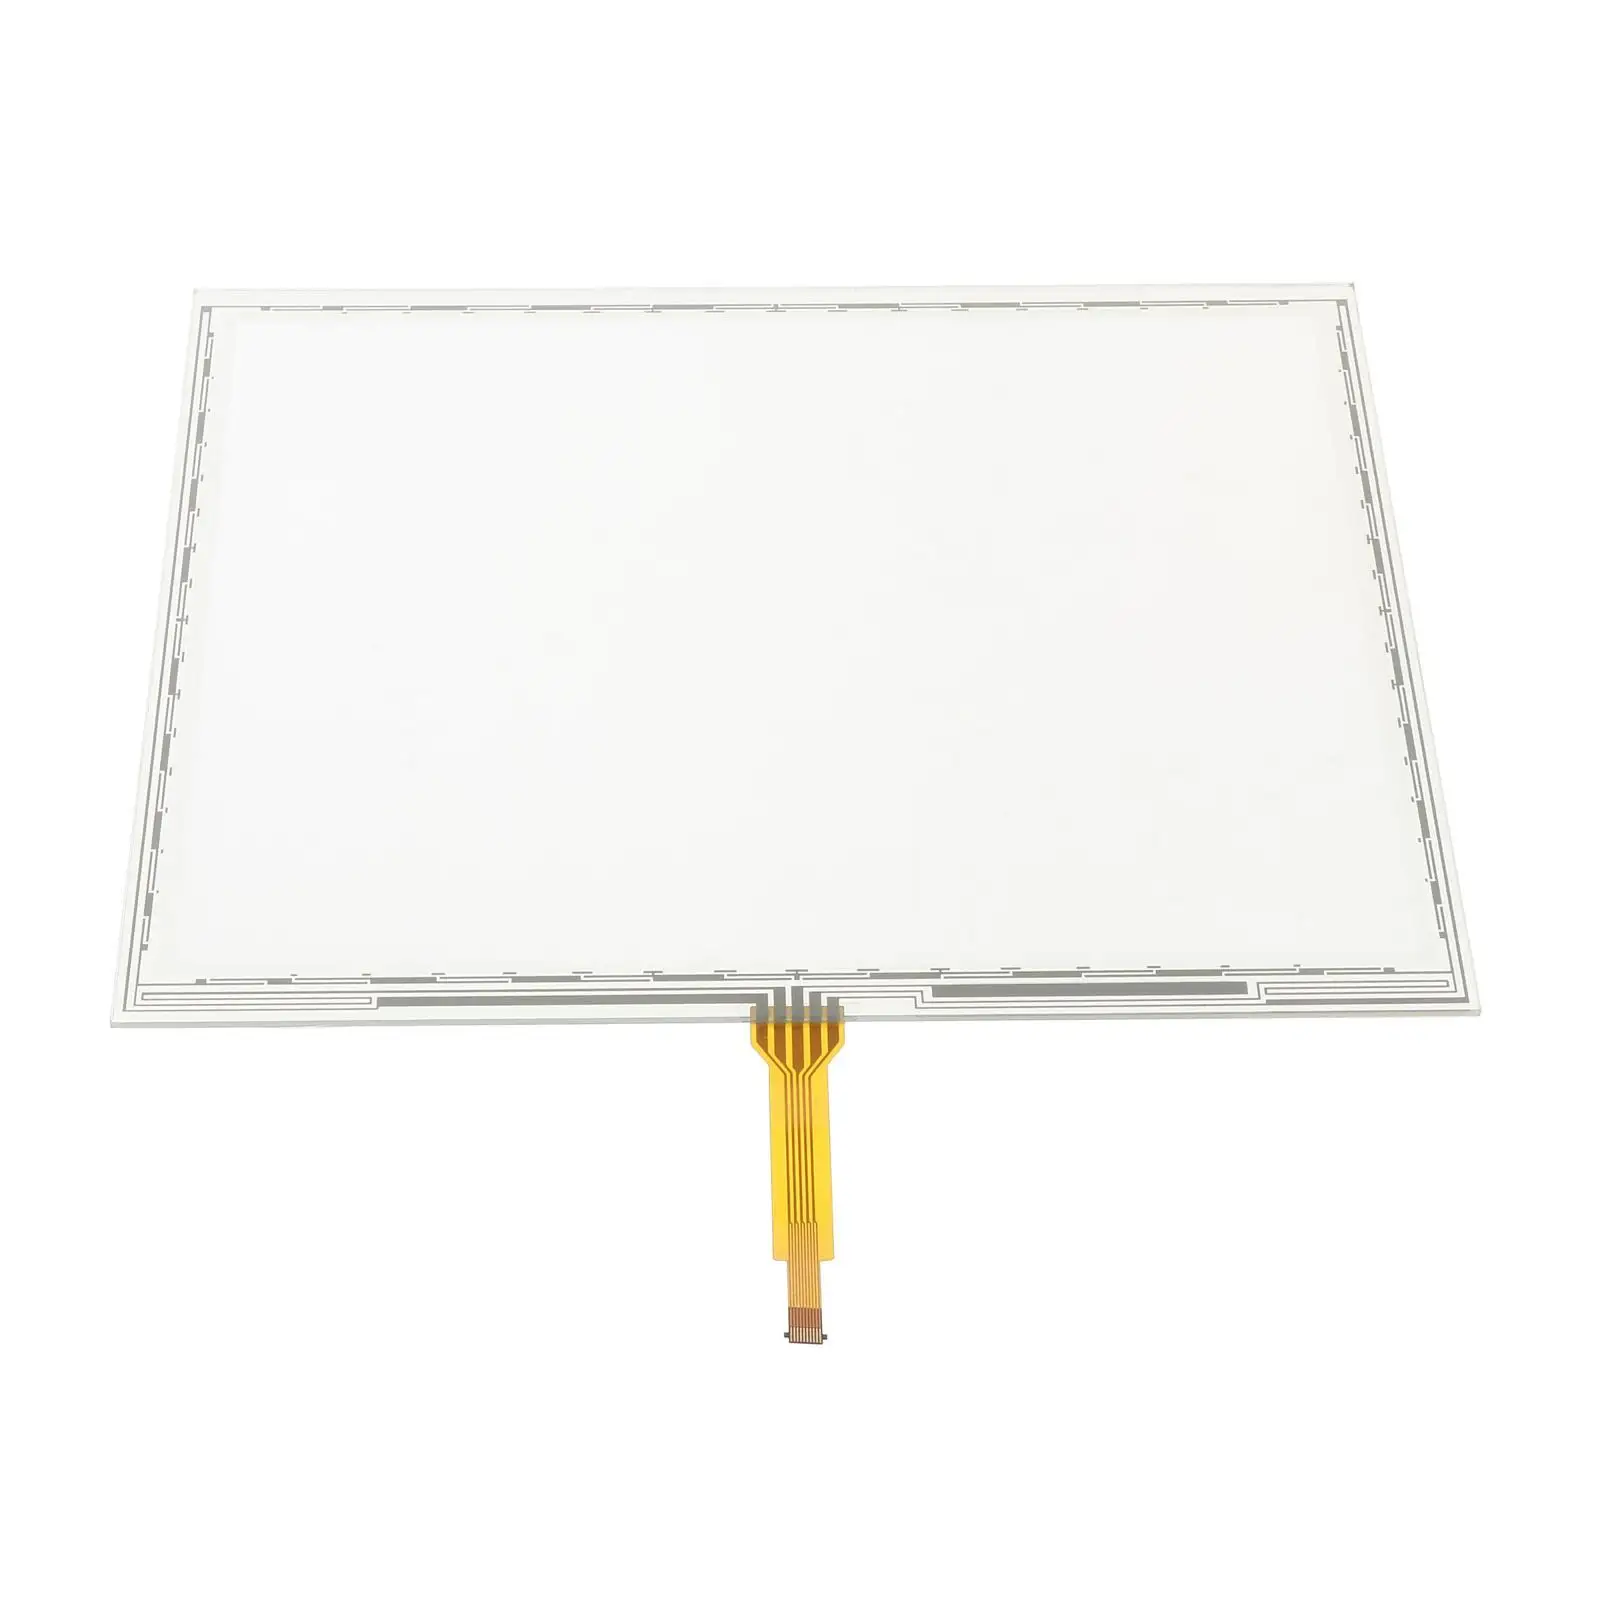 Touch Screen Panel Fpc-863Ne Digital Panel LCD Display Panel for 4640 Stable Performance Replacement Parts Easy to Install